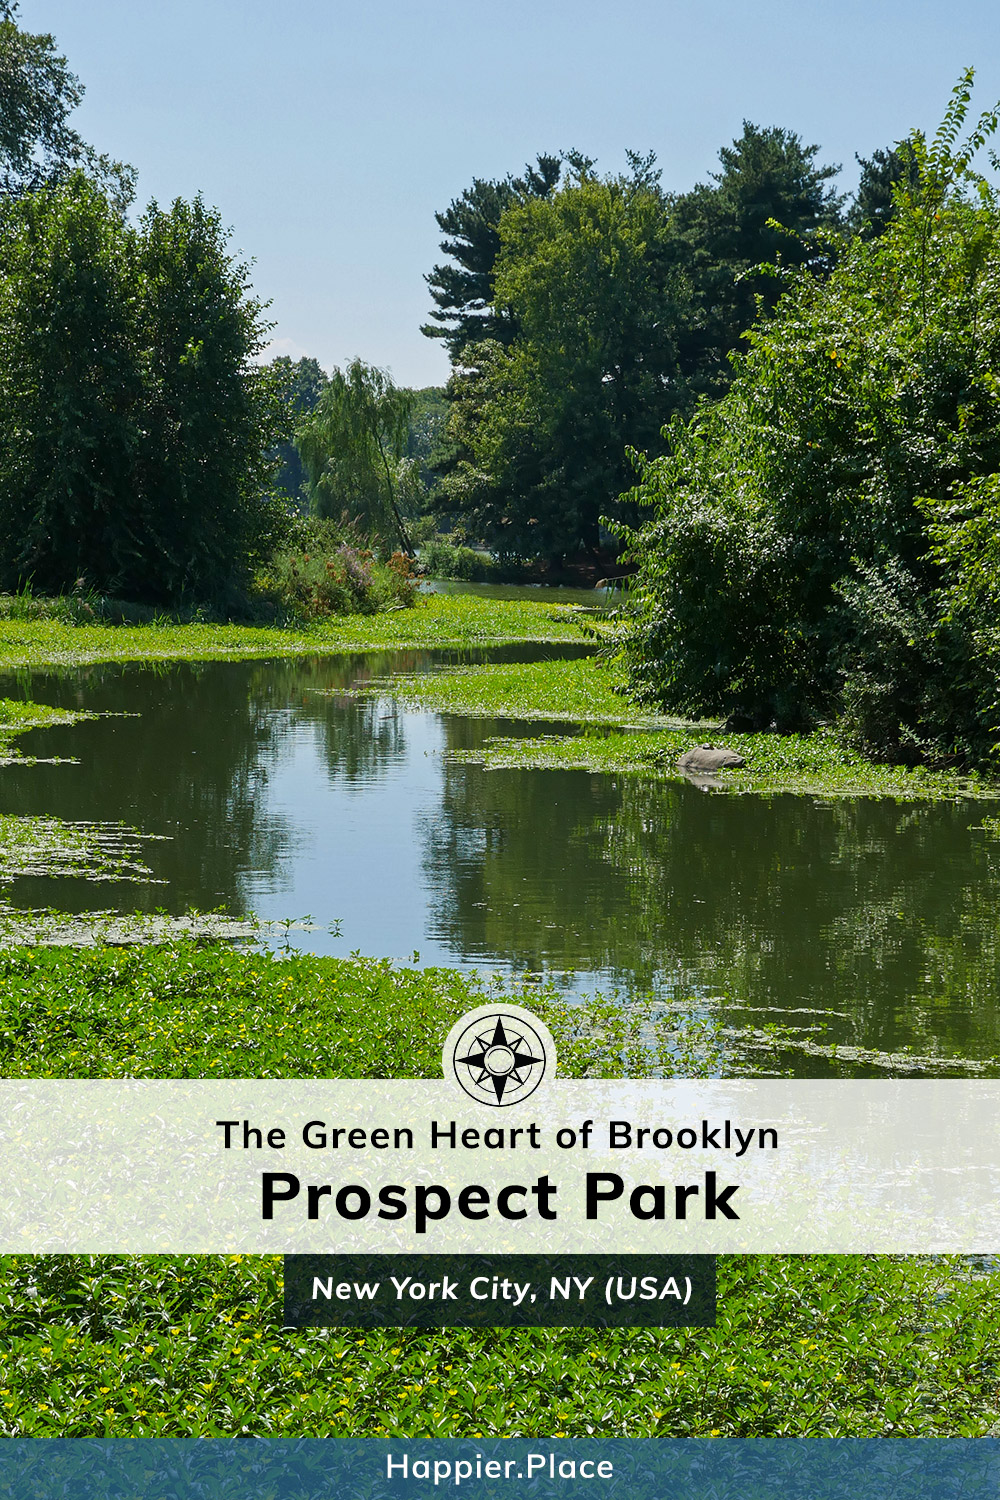 The Green Heart of Brooklyn: Prospect Park - along the Lullwater